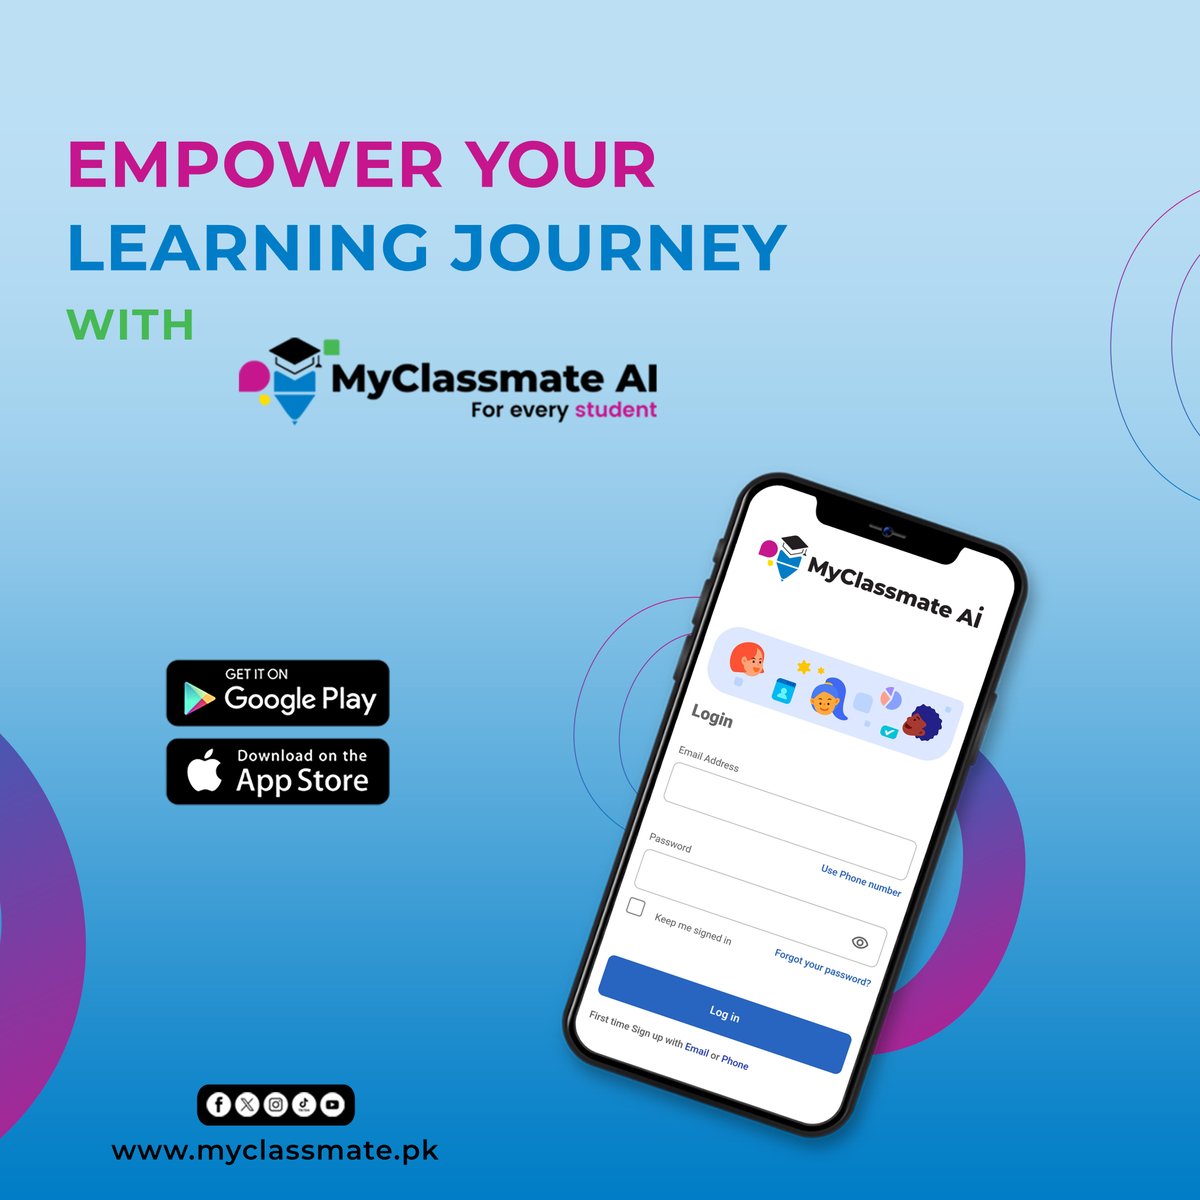 Supercharge your learning with MyClassmate AI!
Personalized lessons, flexible schedules, and a vibrant learner community await. Join the future of education! 

#MyClassmateAI #EmpowerLearning #EducationalInnovation #SmartGeneration #DigitalLearningCompanion #EmpowerYourJourney